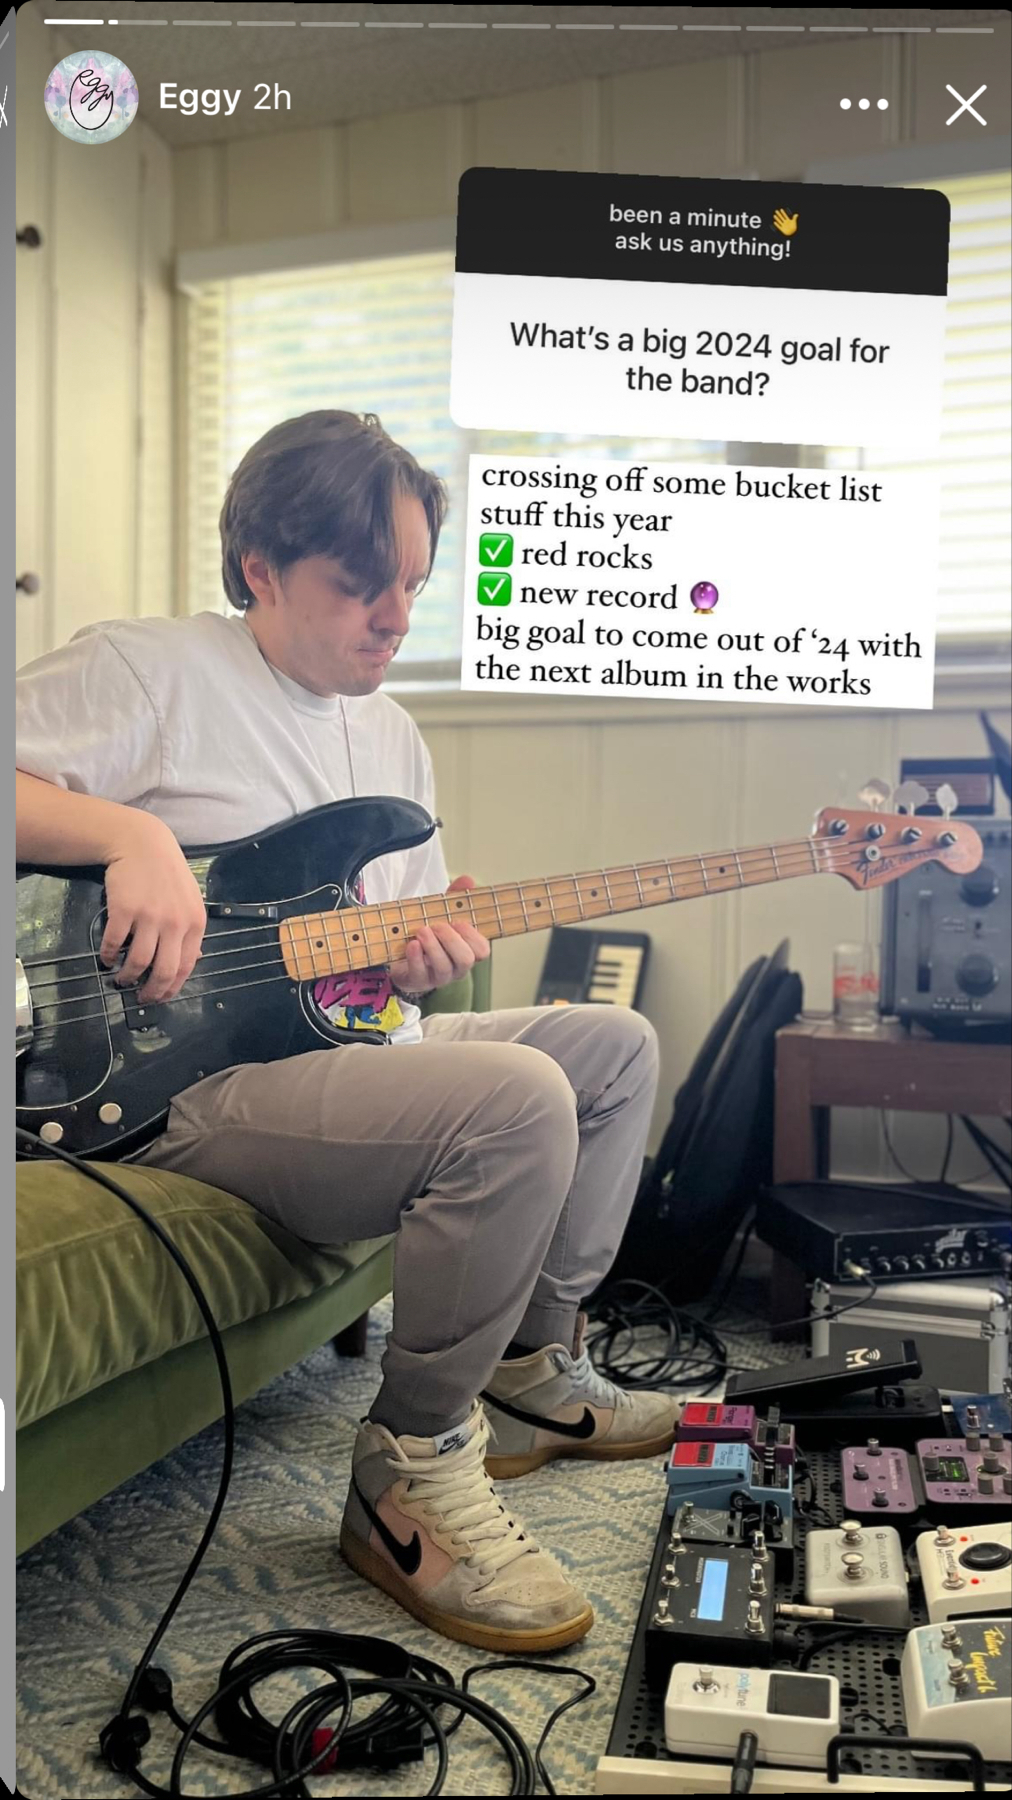 A person seated while playing a black bass guitar, with a variety of guitar pedals at their feet. The individual is focused on the instrument, surrounded by music equipment. A text overlay reveals goals for a band in 2024, including playing at Red